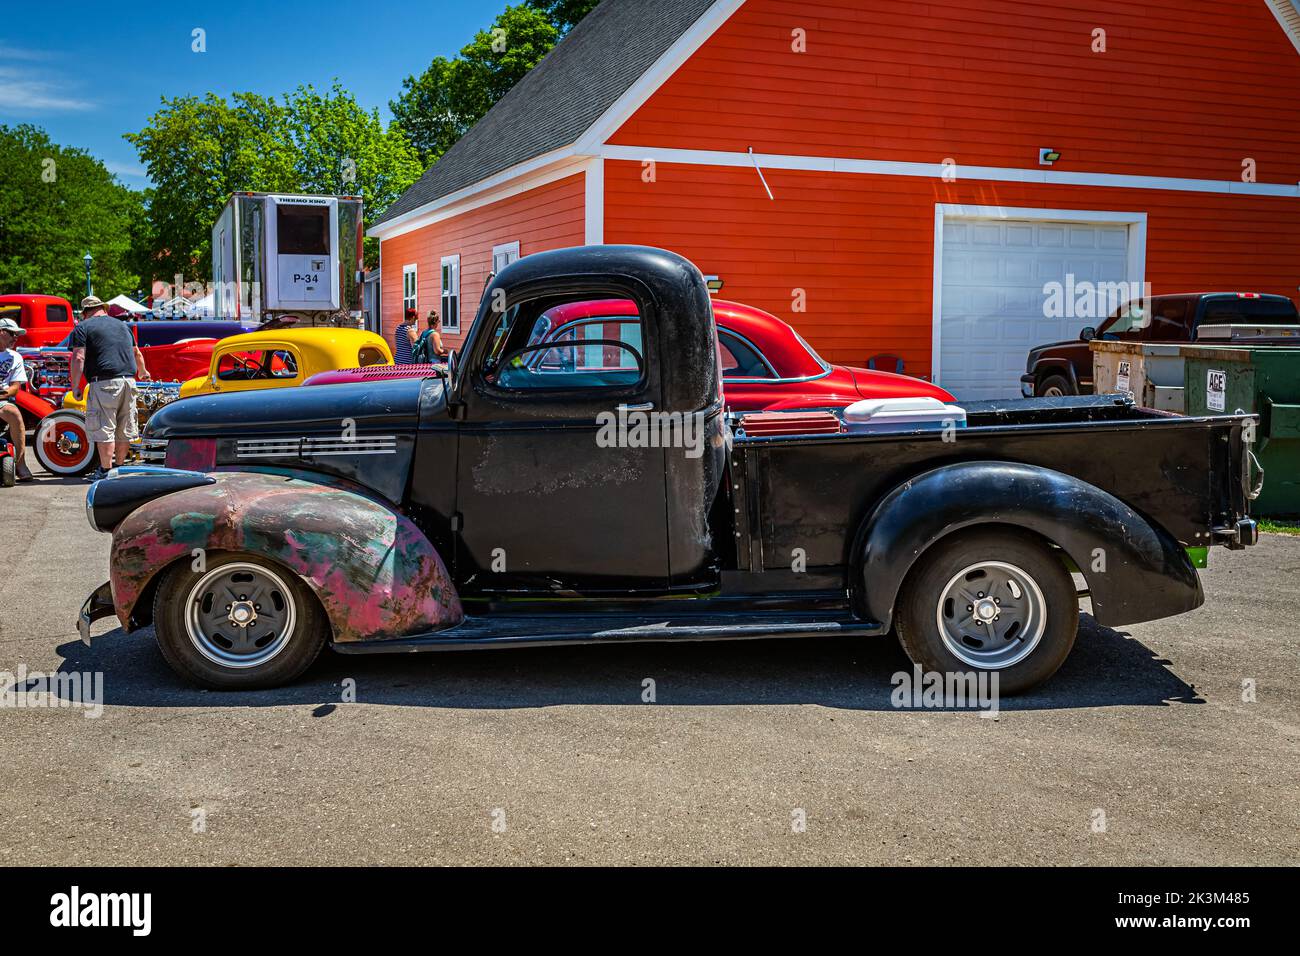 Falcon Heights, MN - June 18, 2022: High perspective side view of a 1946 Chevrolet AK Series Pickup Truck at a local car show. Stock Photo